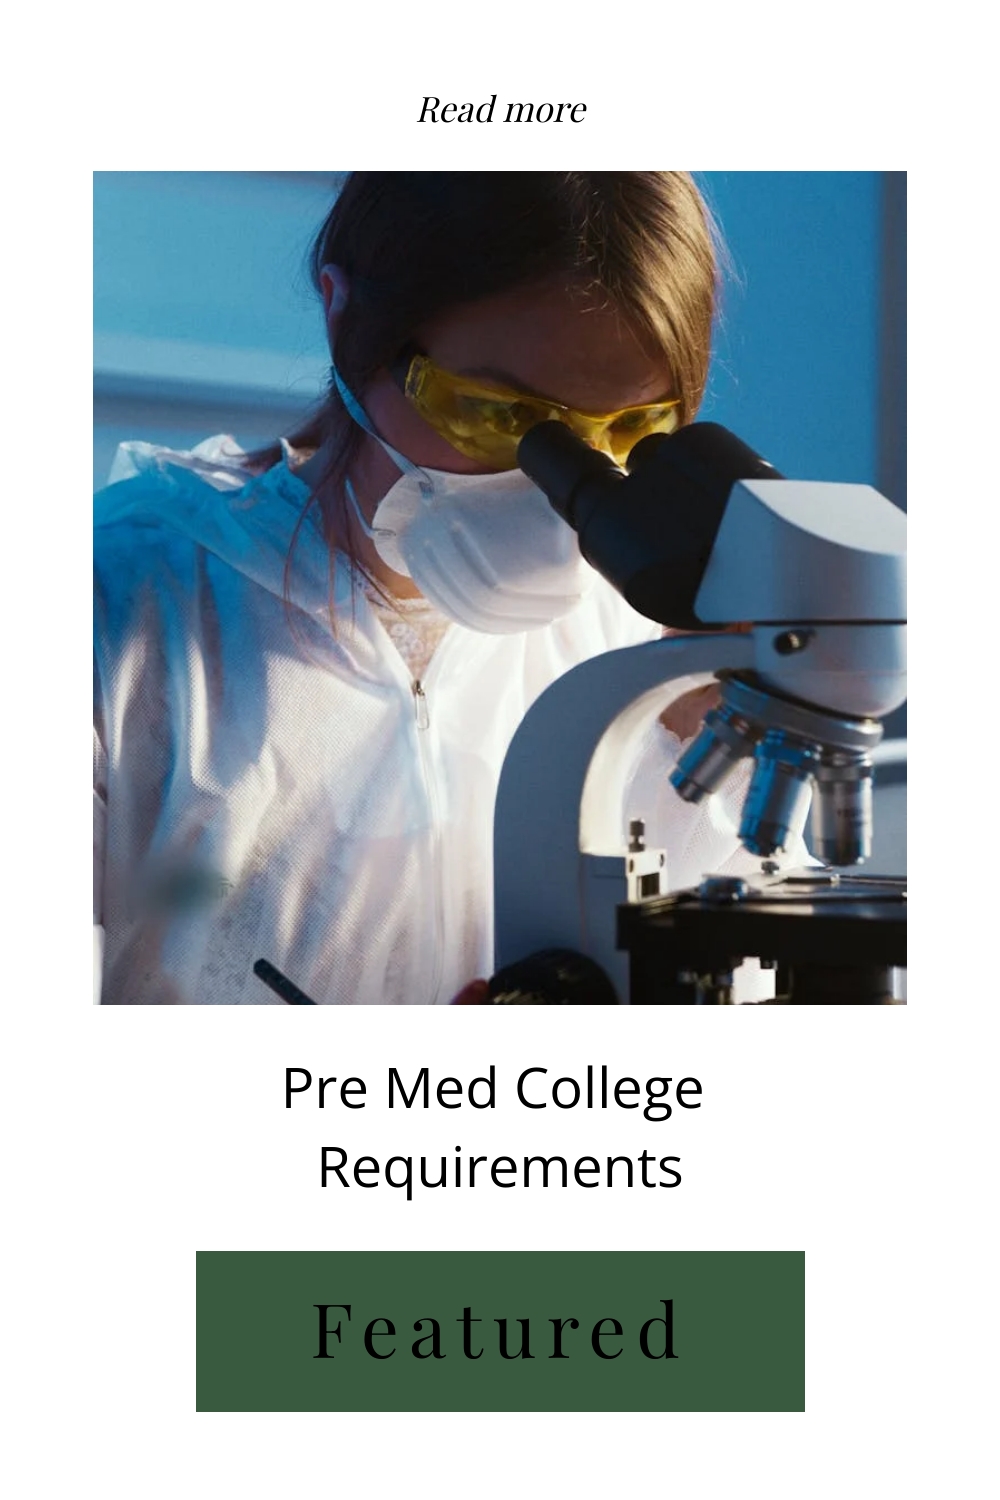 Discover the essential pre-med college requirements from coursework to clinical experience to help you successfully apply to medical school.